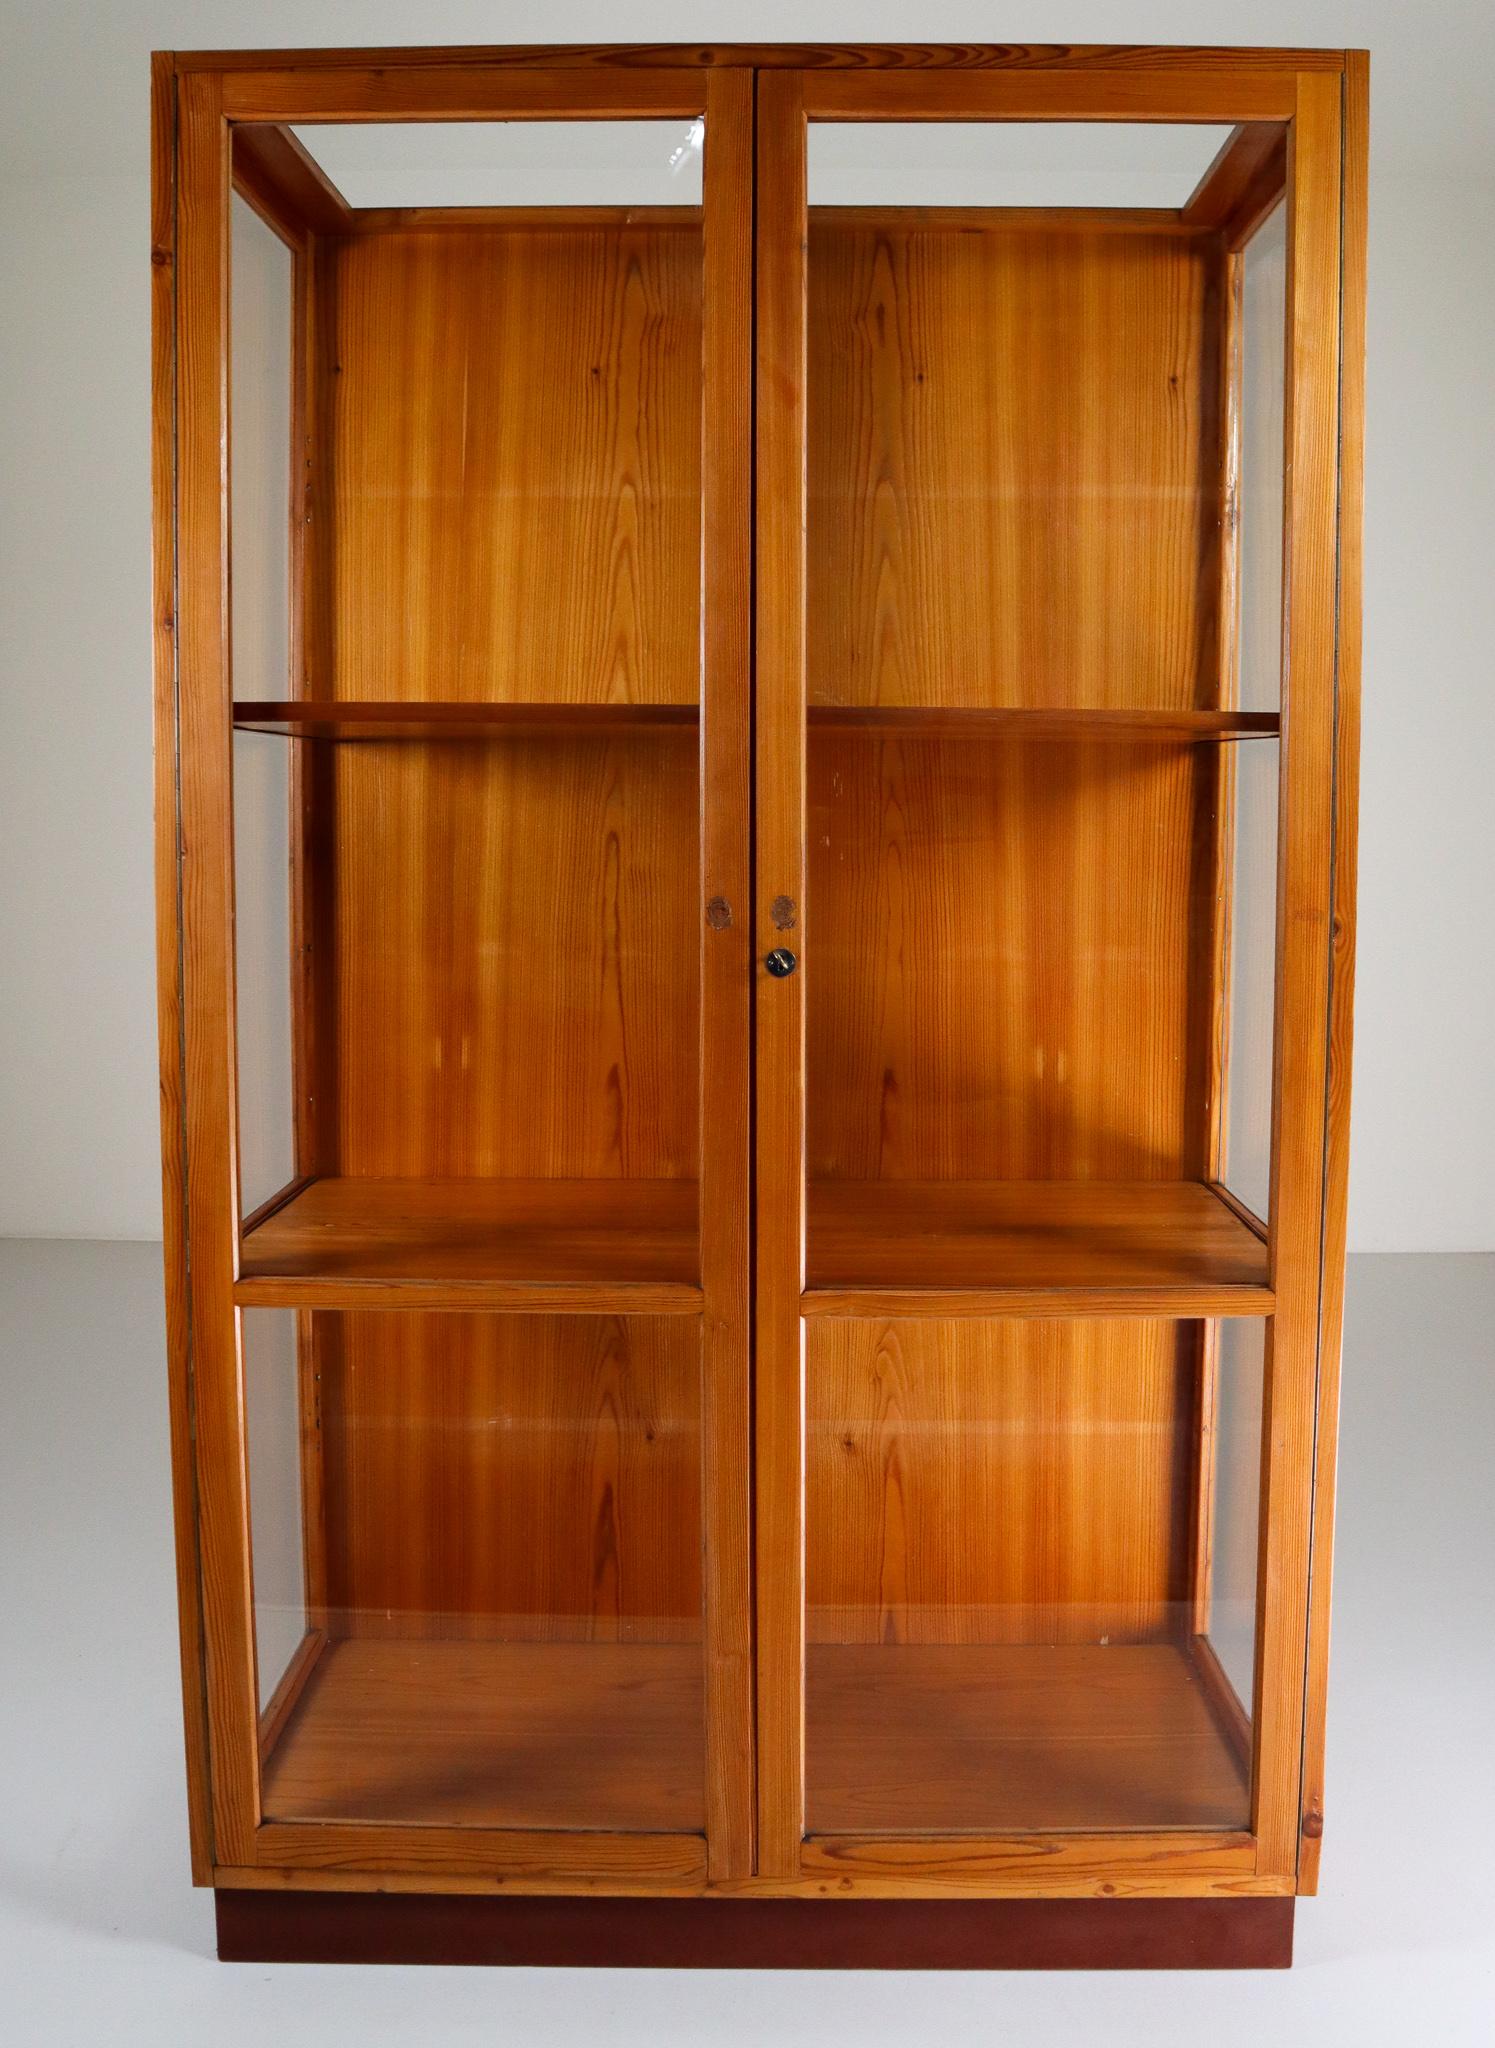 A unique set of twelve glazed display cabinets with perfect patina and original glass made in Praque Czech Republic 1950s for the National U P Museum Praha in solid pine. The wooden shelves can be height adjusted. Pieces like this with original